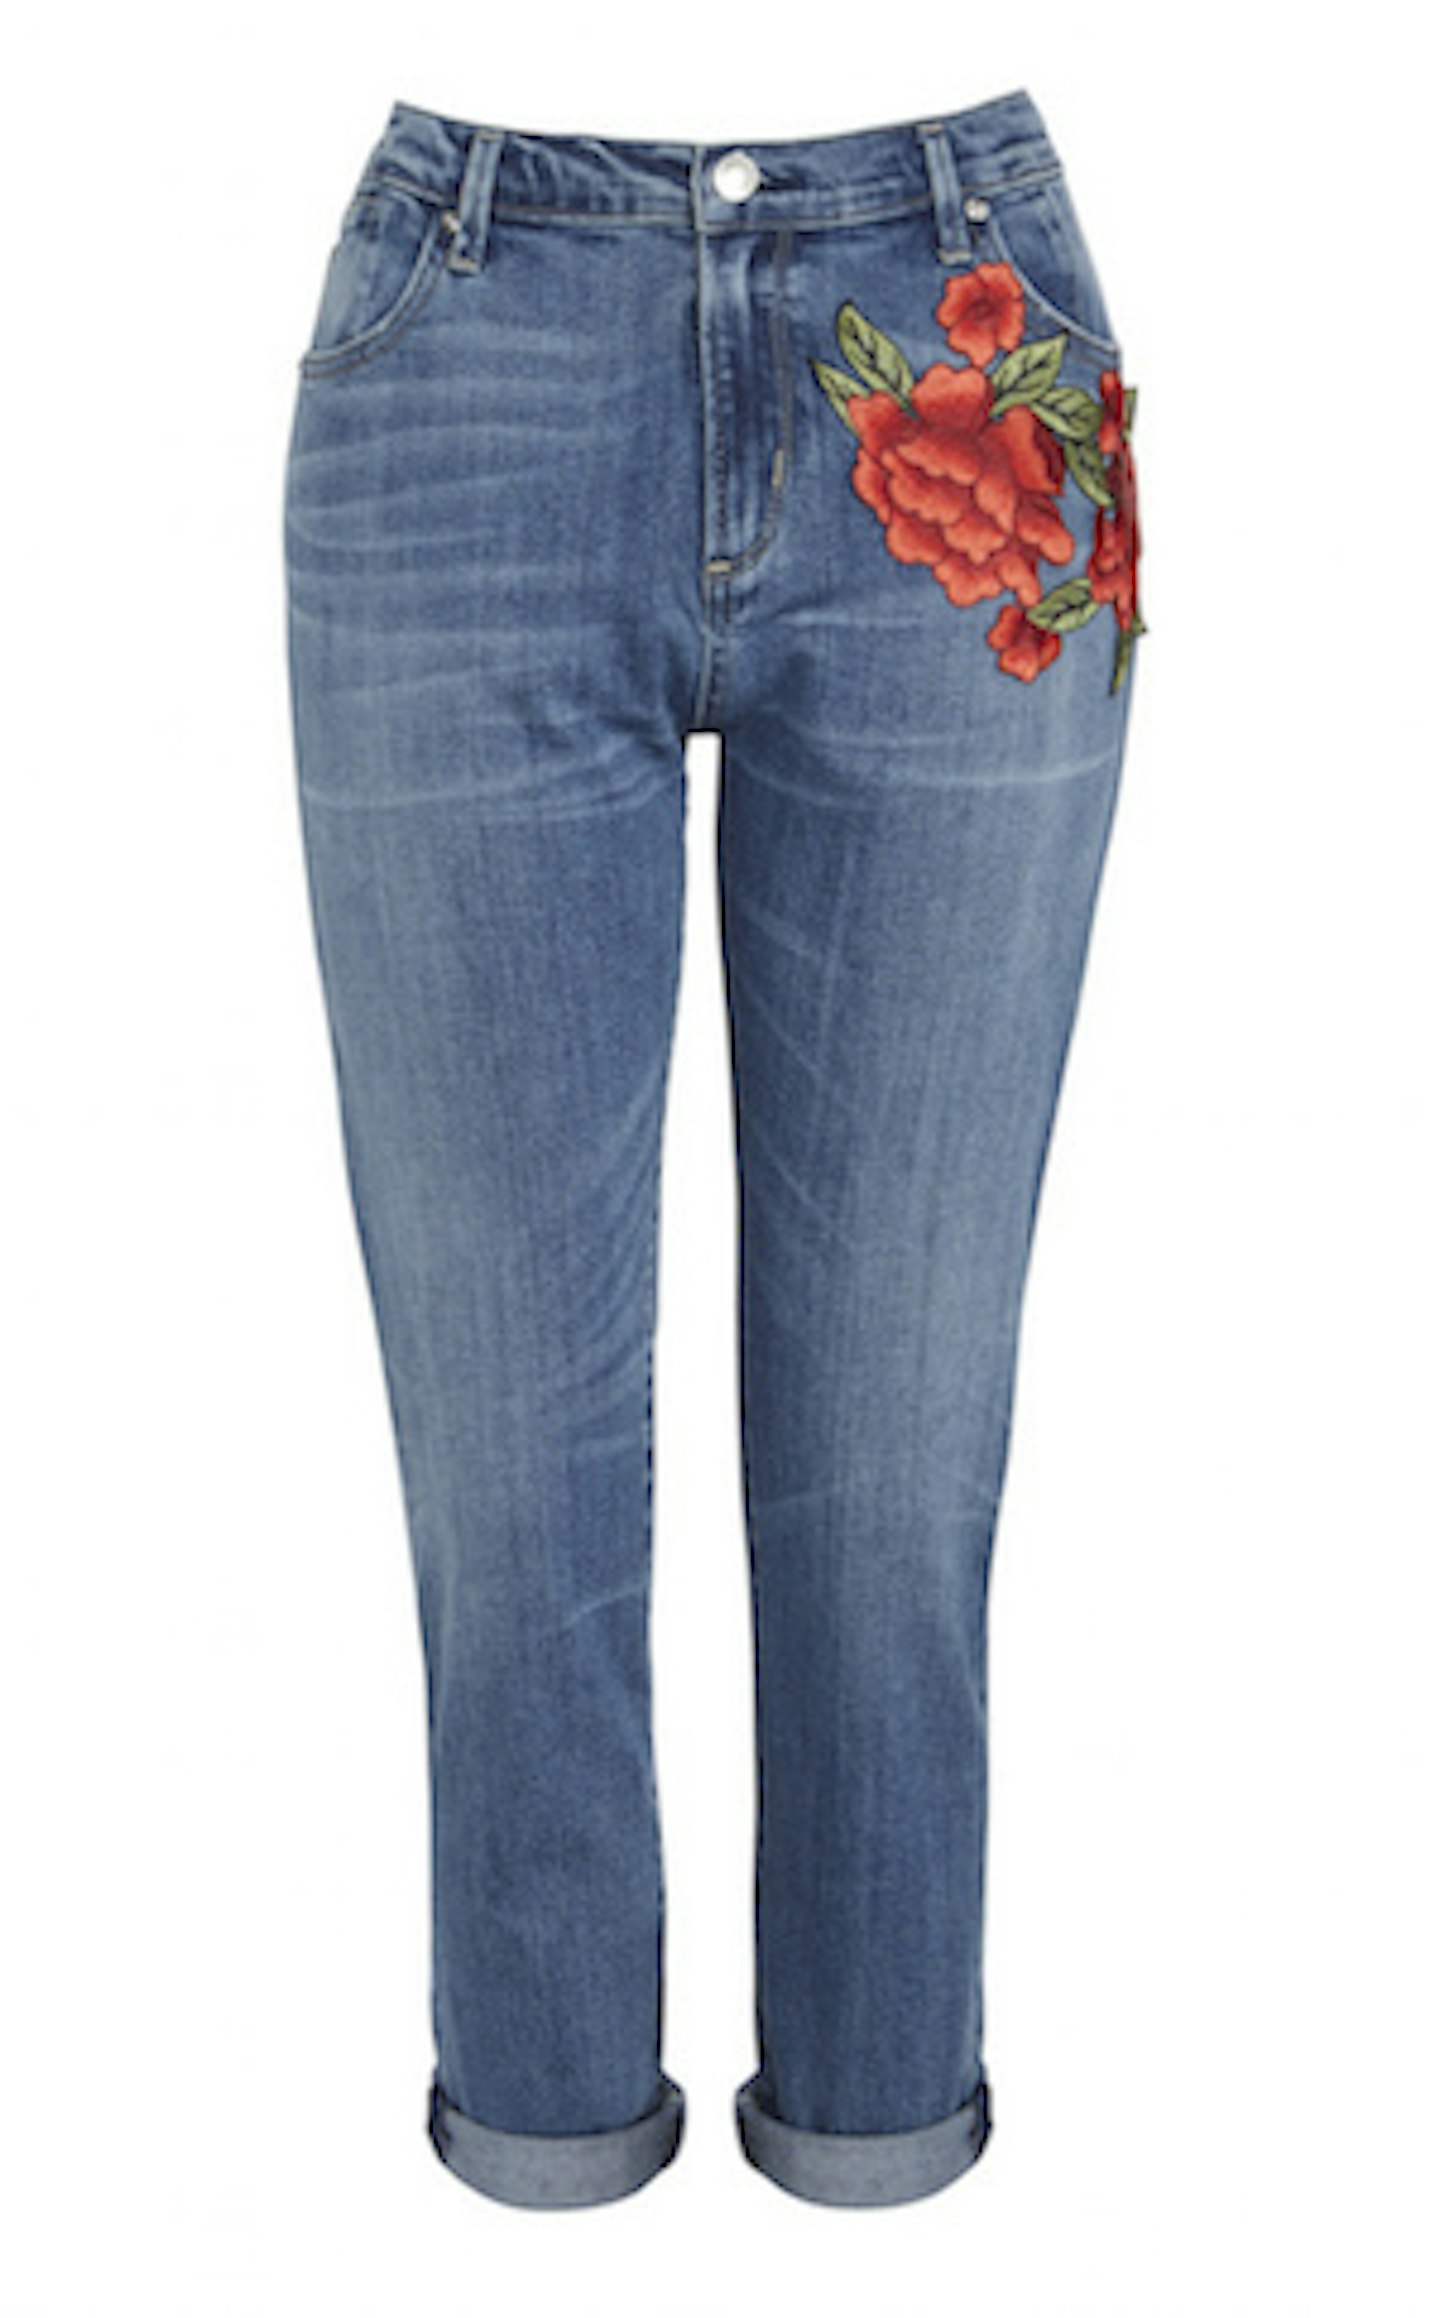 Embroidered Jeans 18